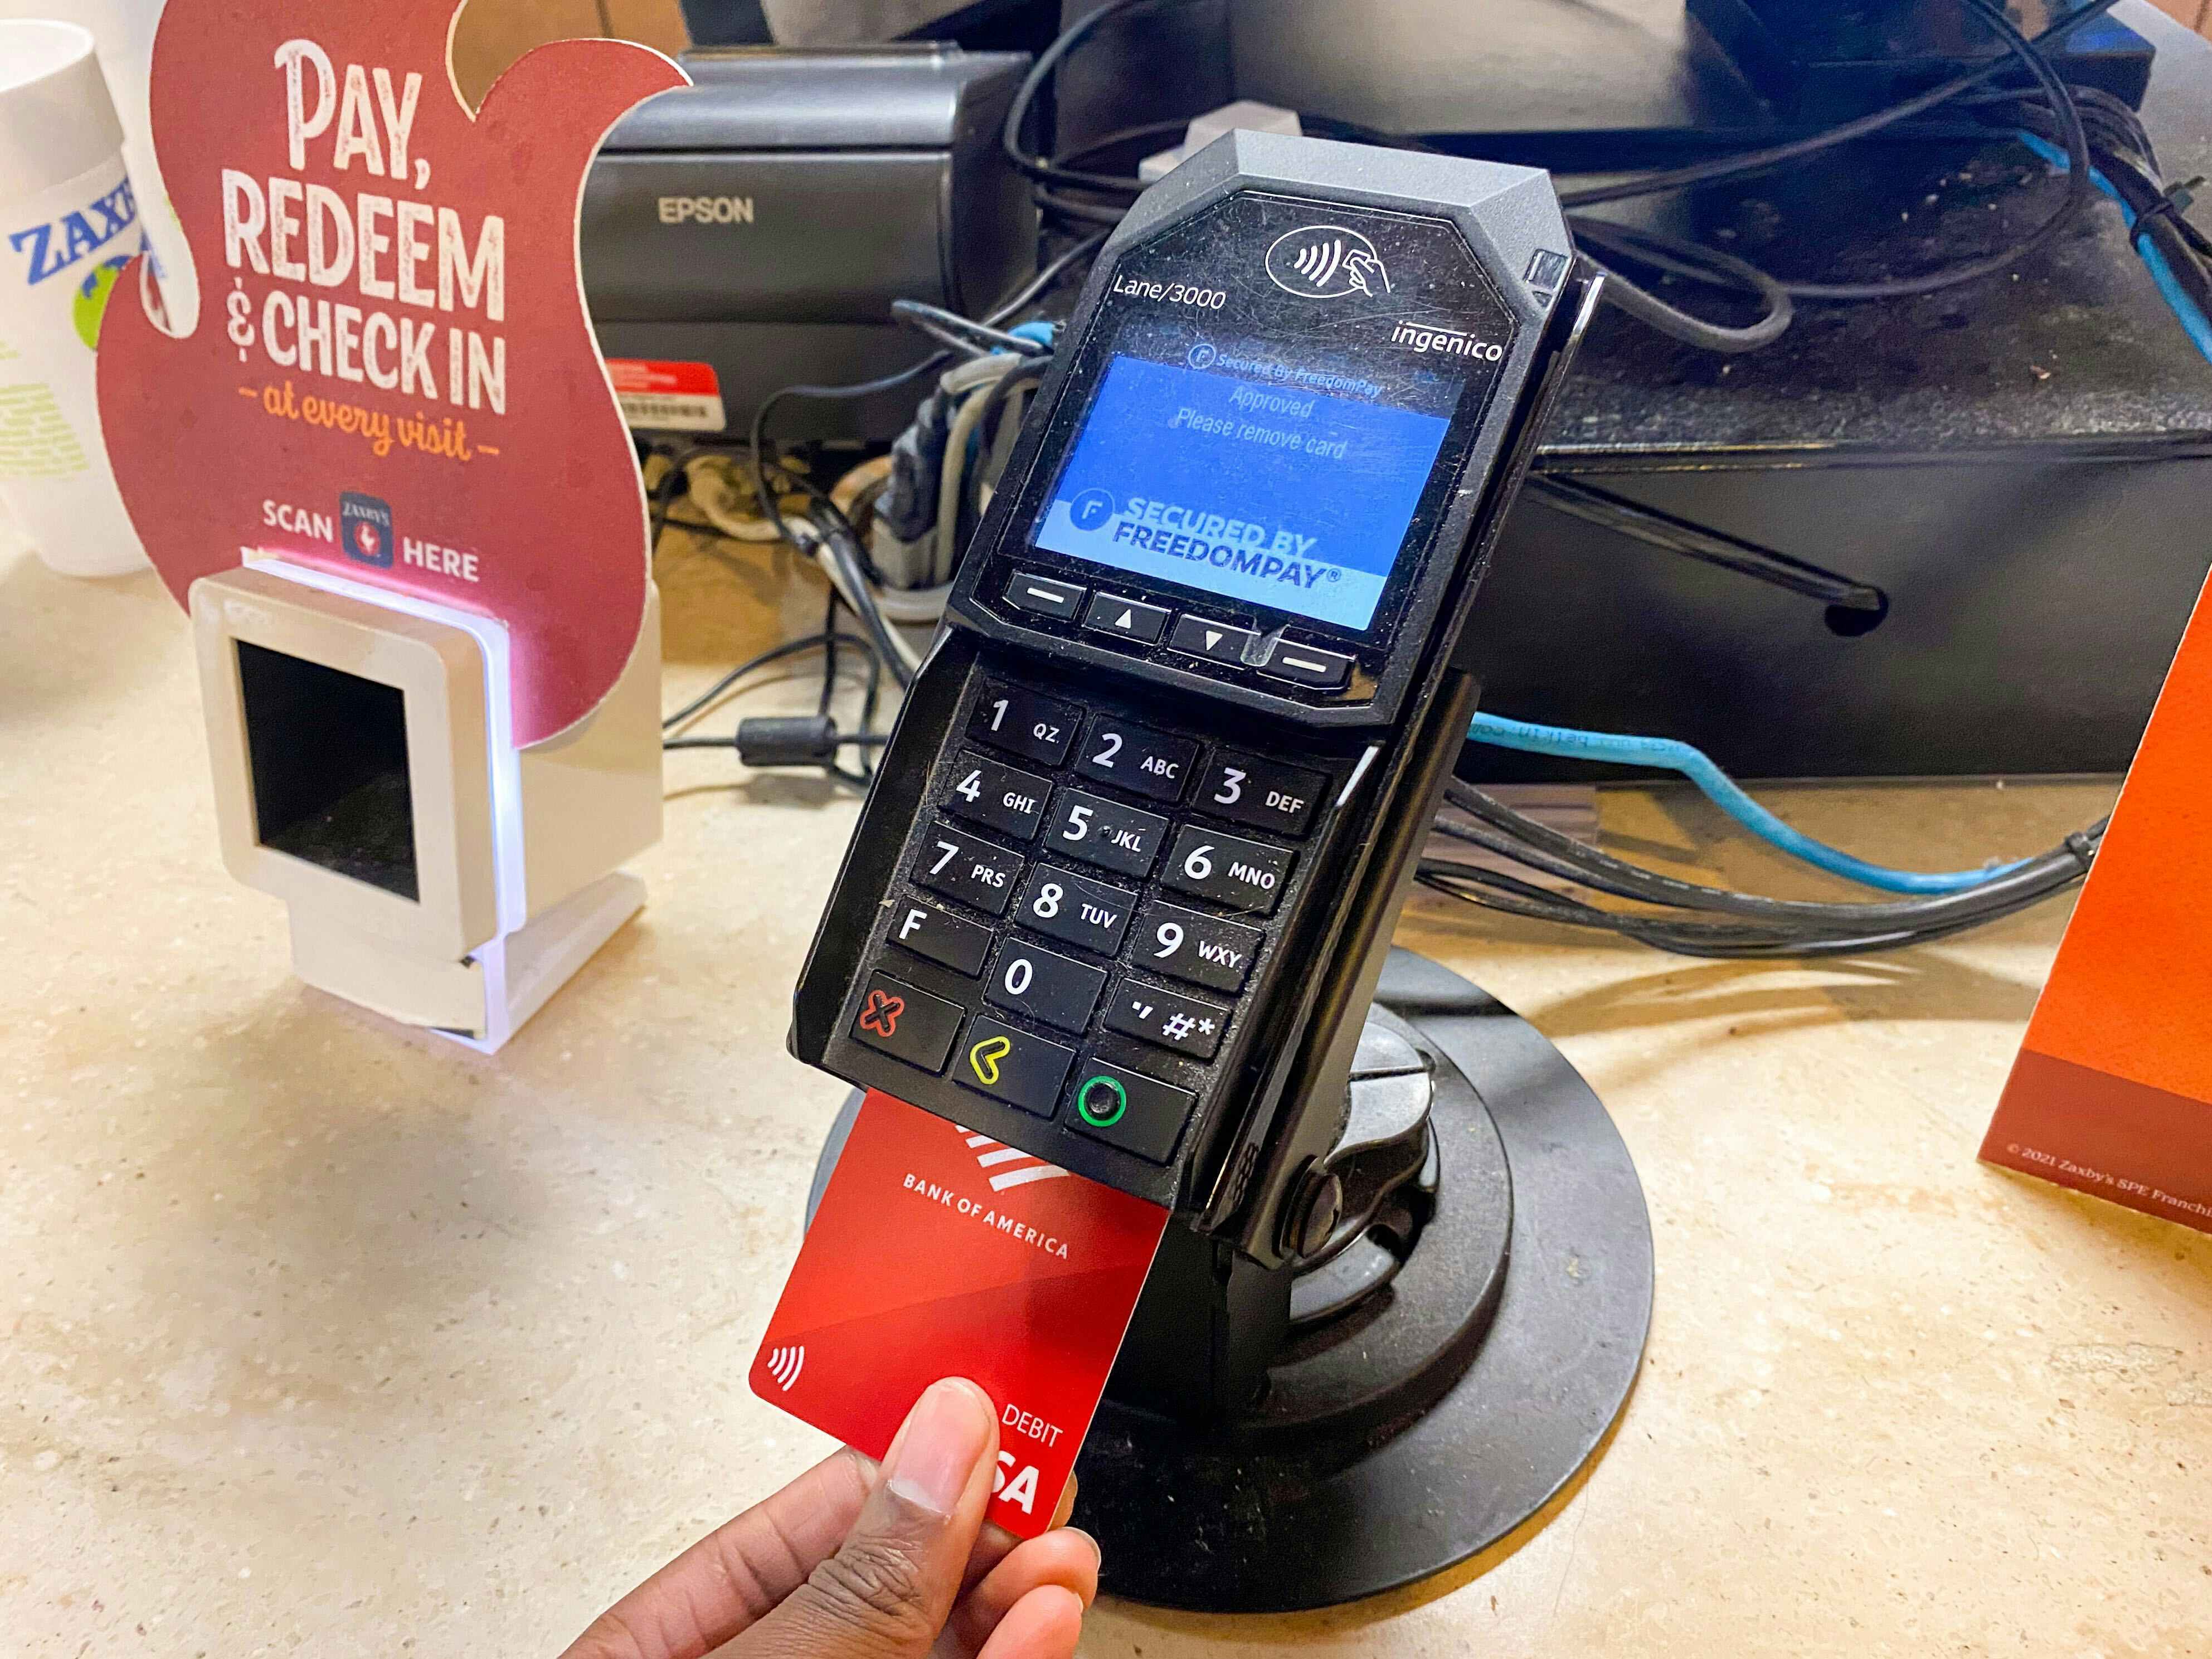 A person's hand inserting their credit card into the card reader at the counter of Zaxby's.